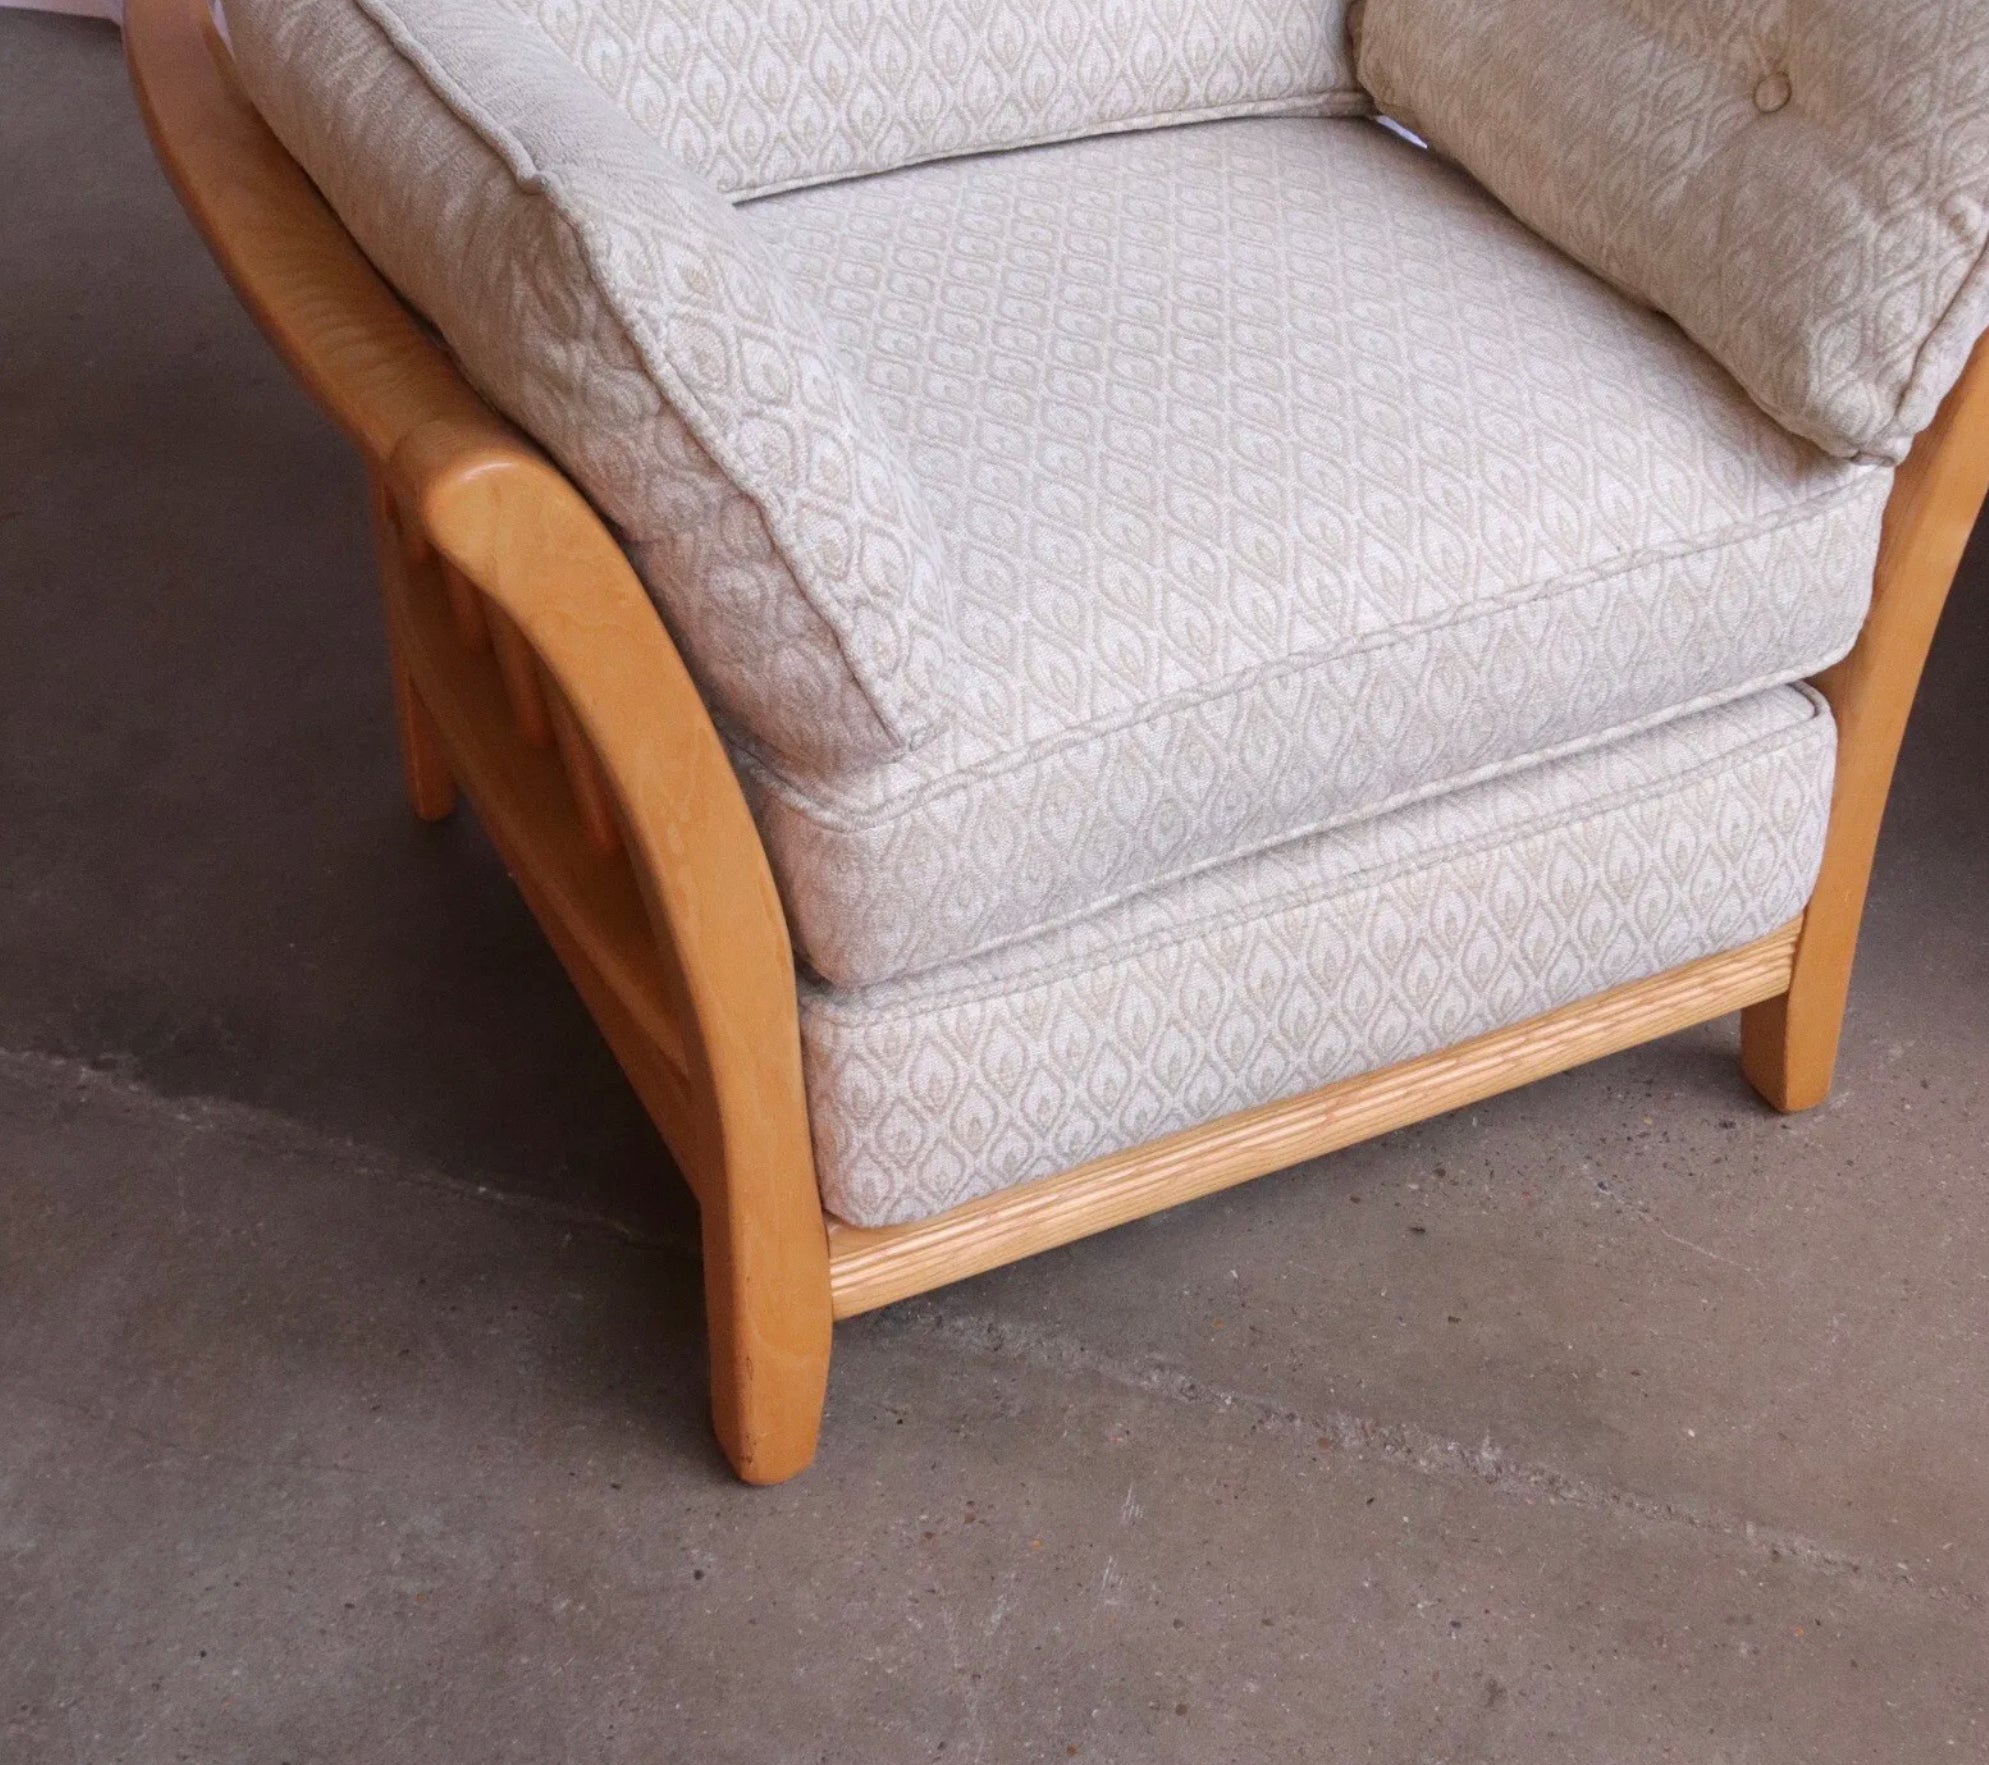 Ercol Style Solid Ash Sofa Seater And Matching Armchair Light Wood Vintage Mcm - teakyfinders